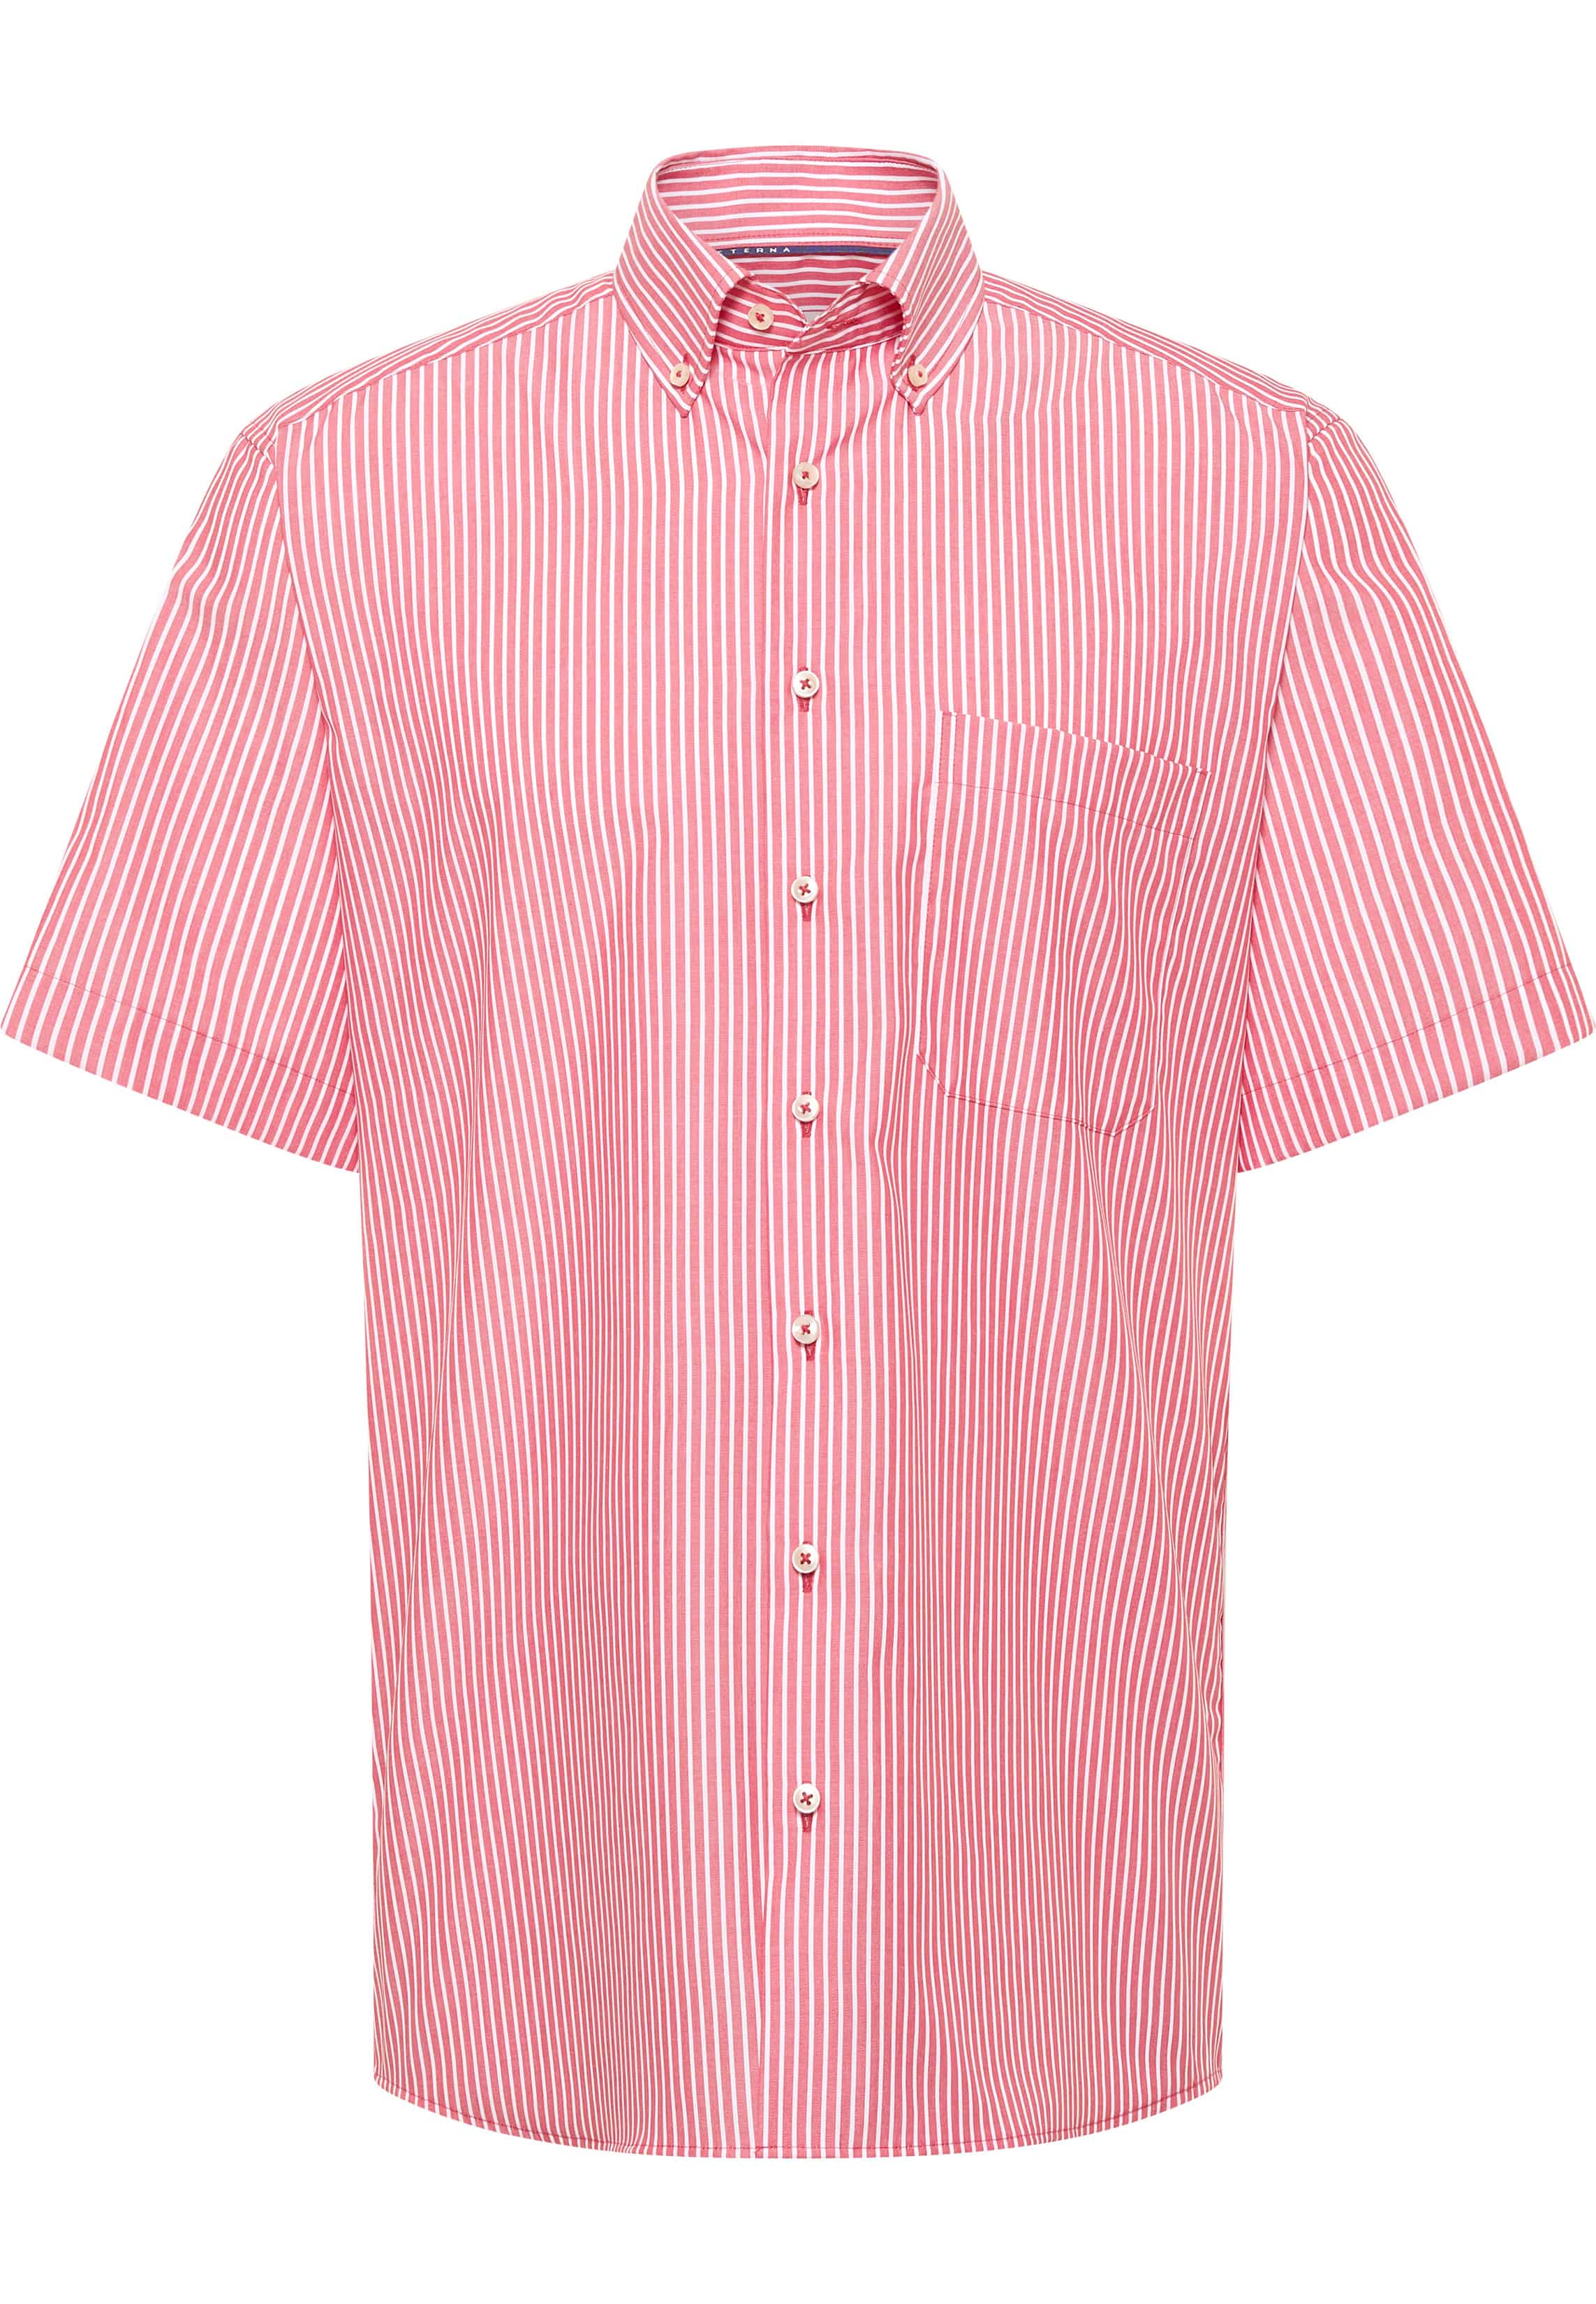 COMFORT FIT Shirt in red striped